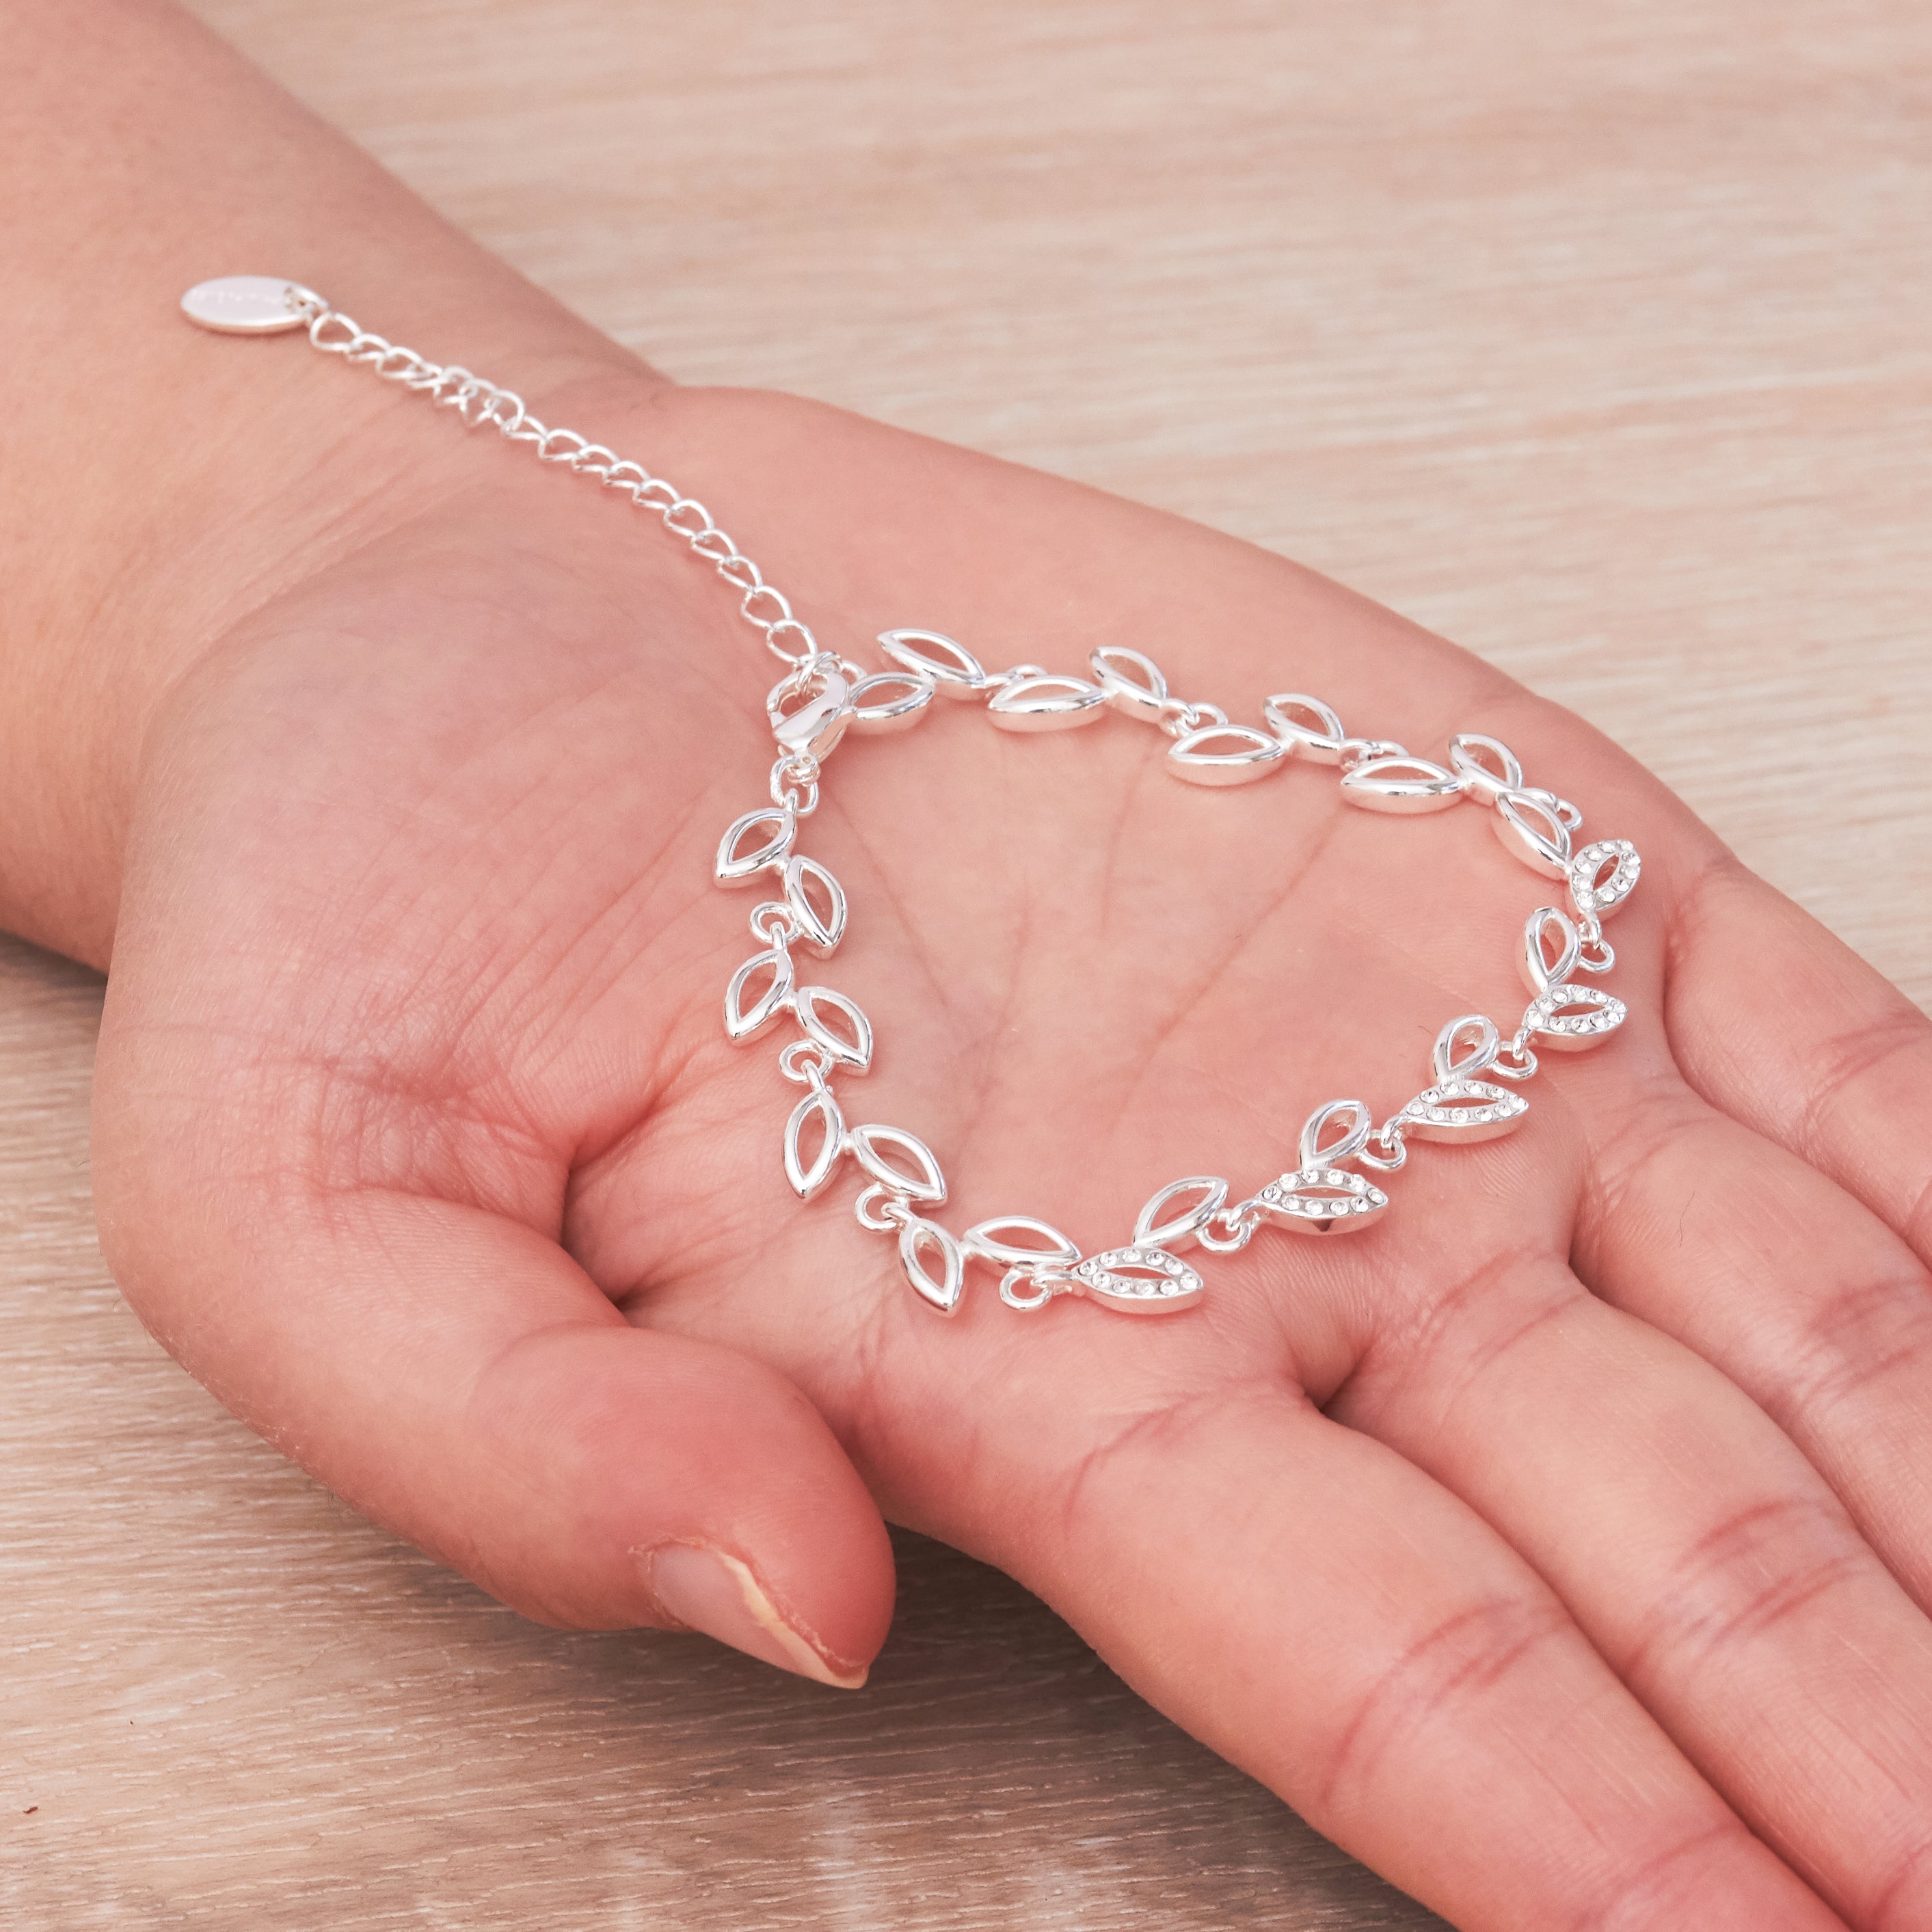 Silver Plated Leaf Bracelet Created With Crystals From Zircondia®